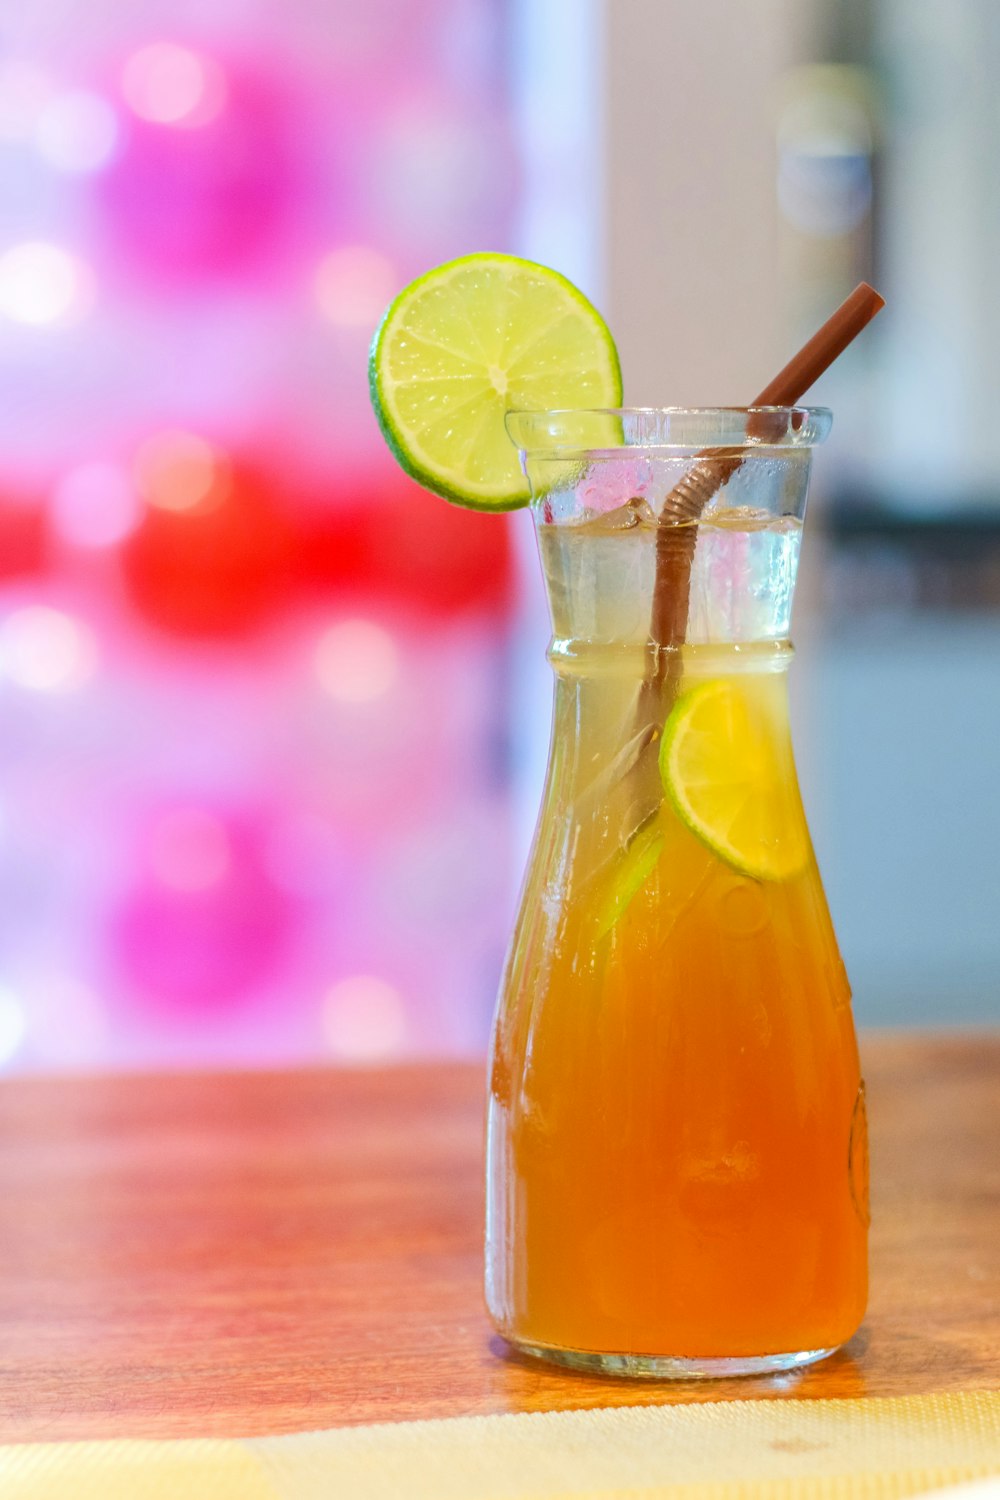 clear glass bottle with yellow liquid and sliced lemon